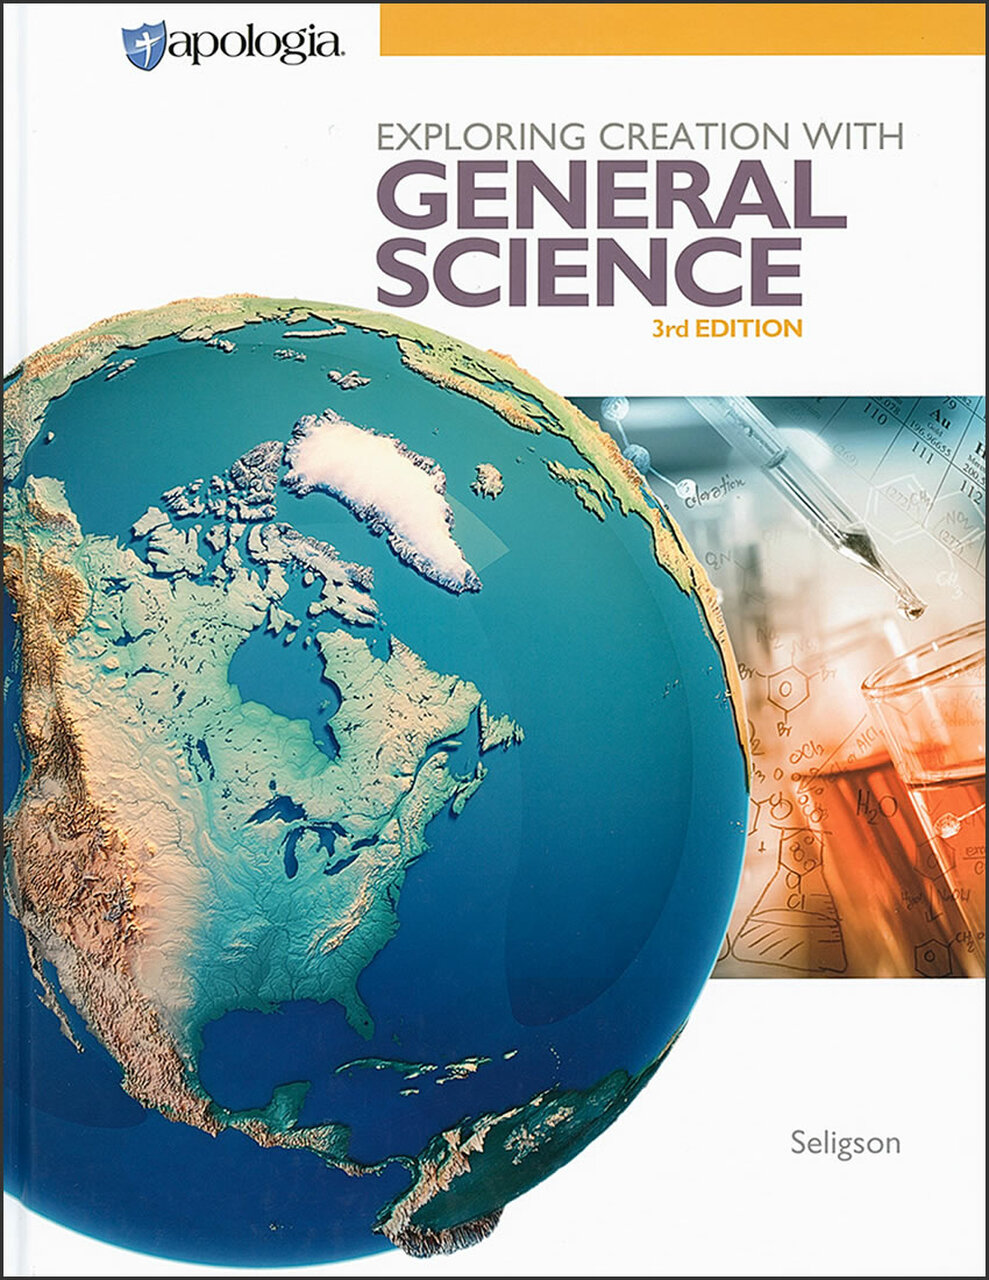 General Science text